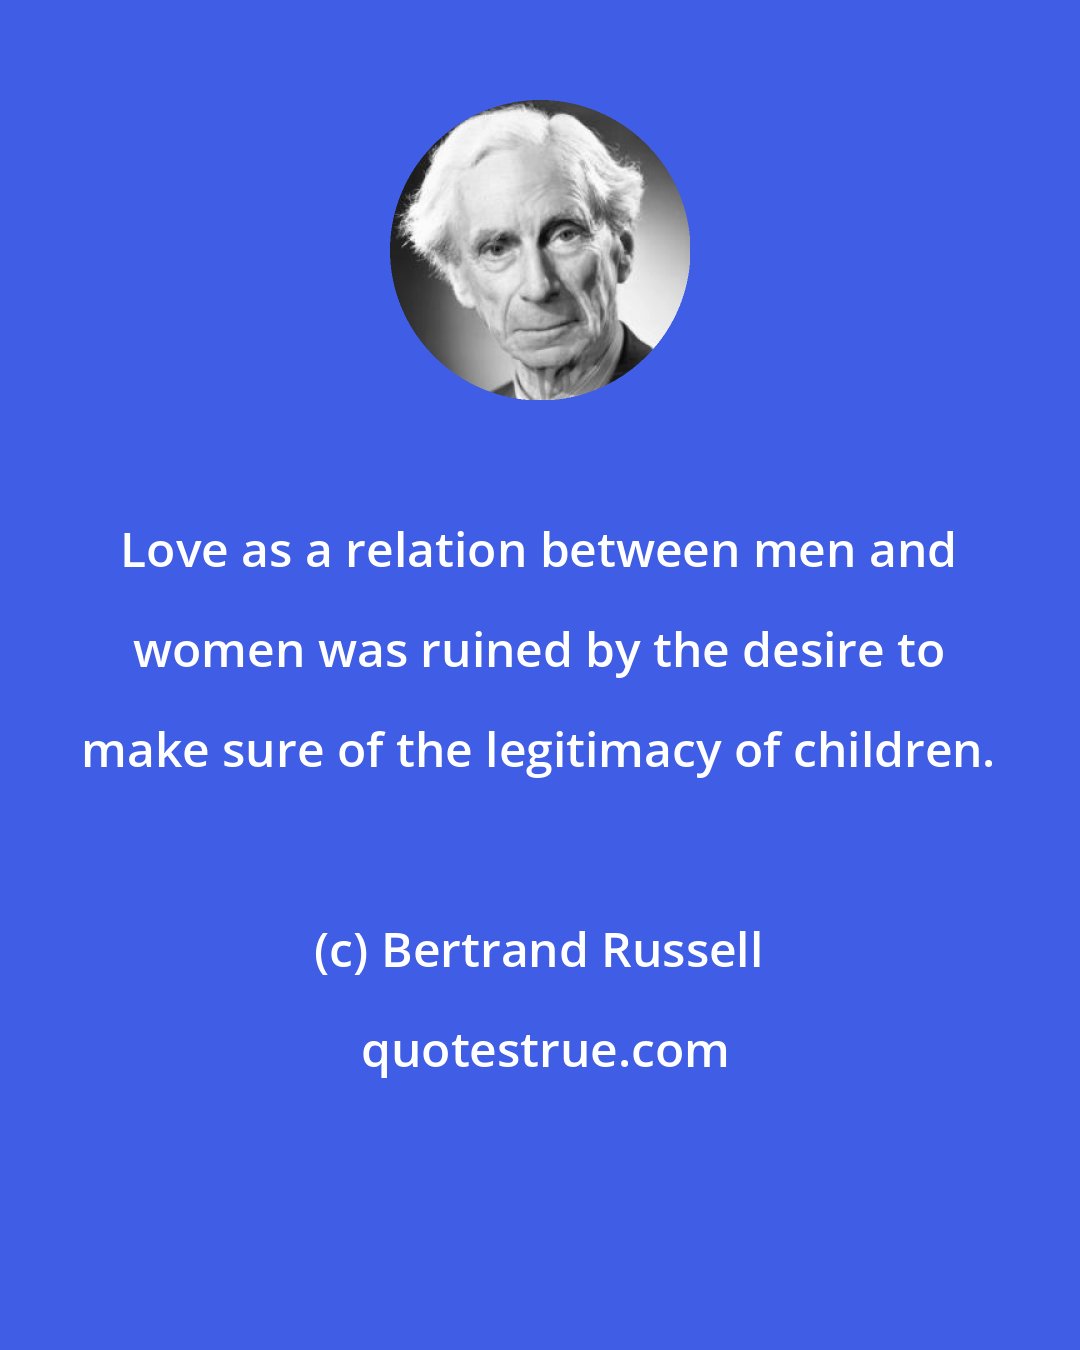 Bertrand Russell: Love as a relation between men and women was ruined by the desire to make sure of the legitimacy of children.